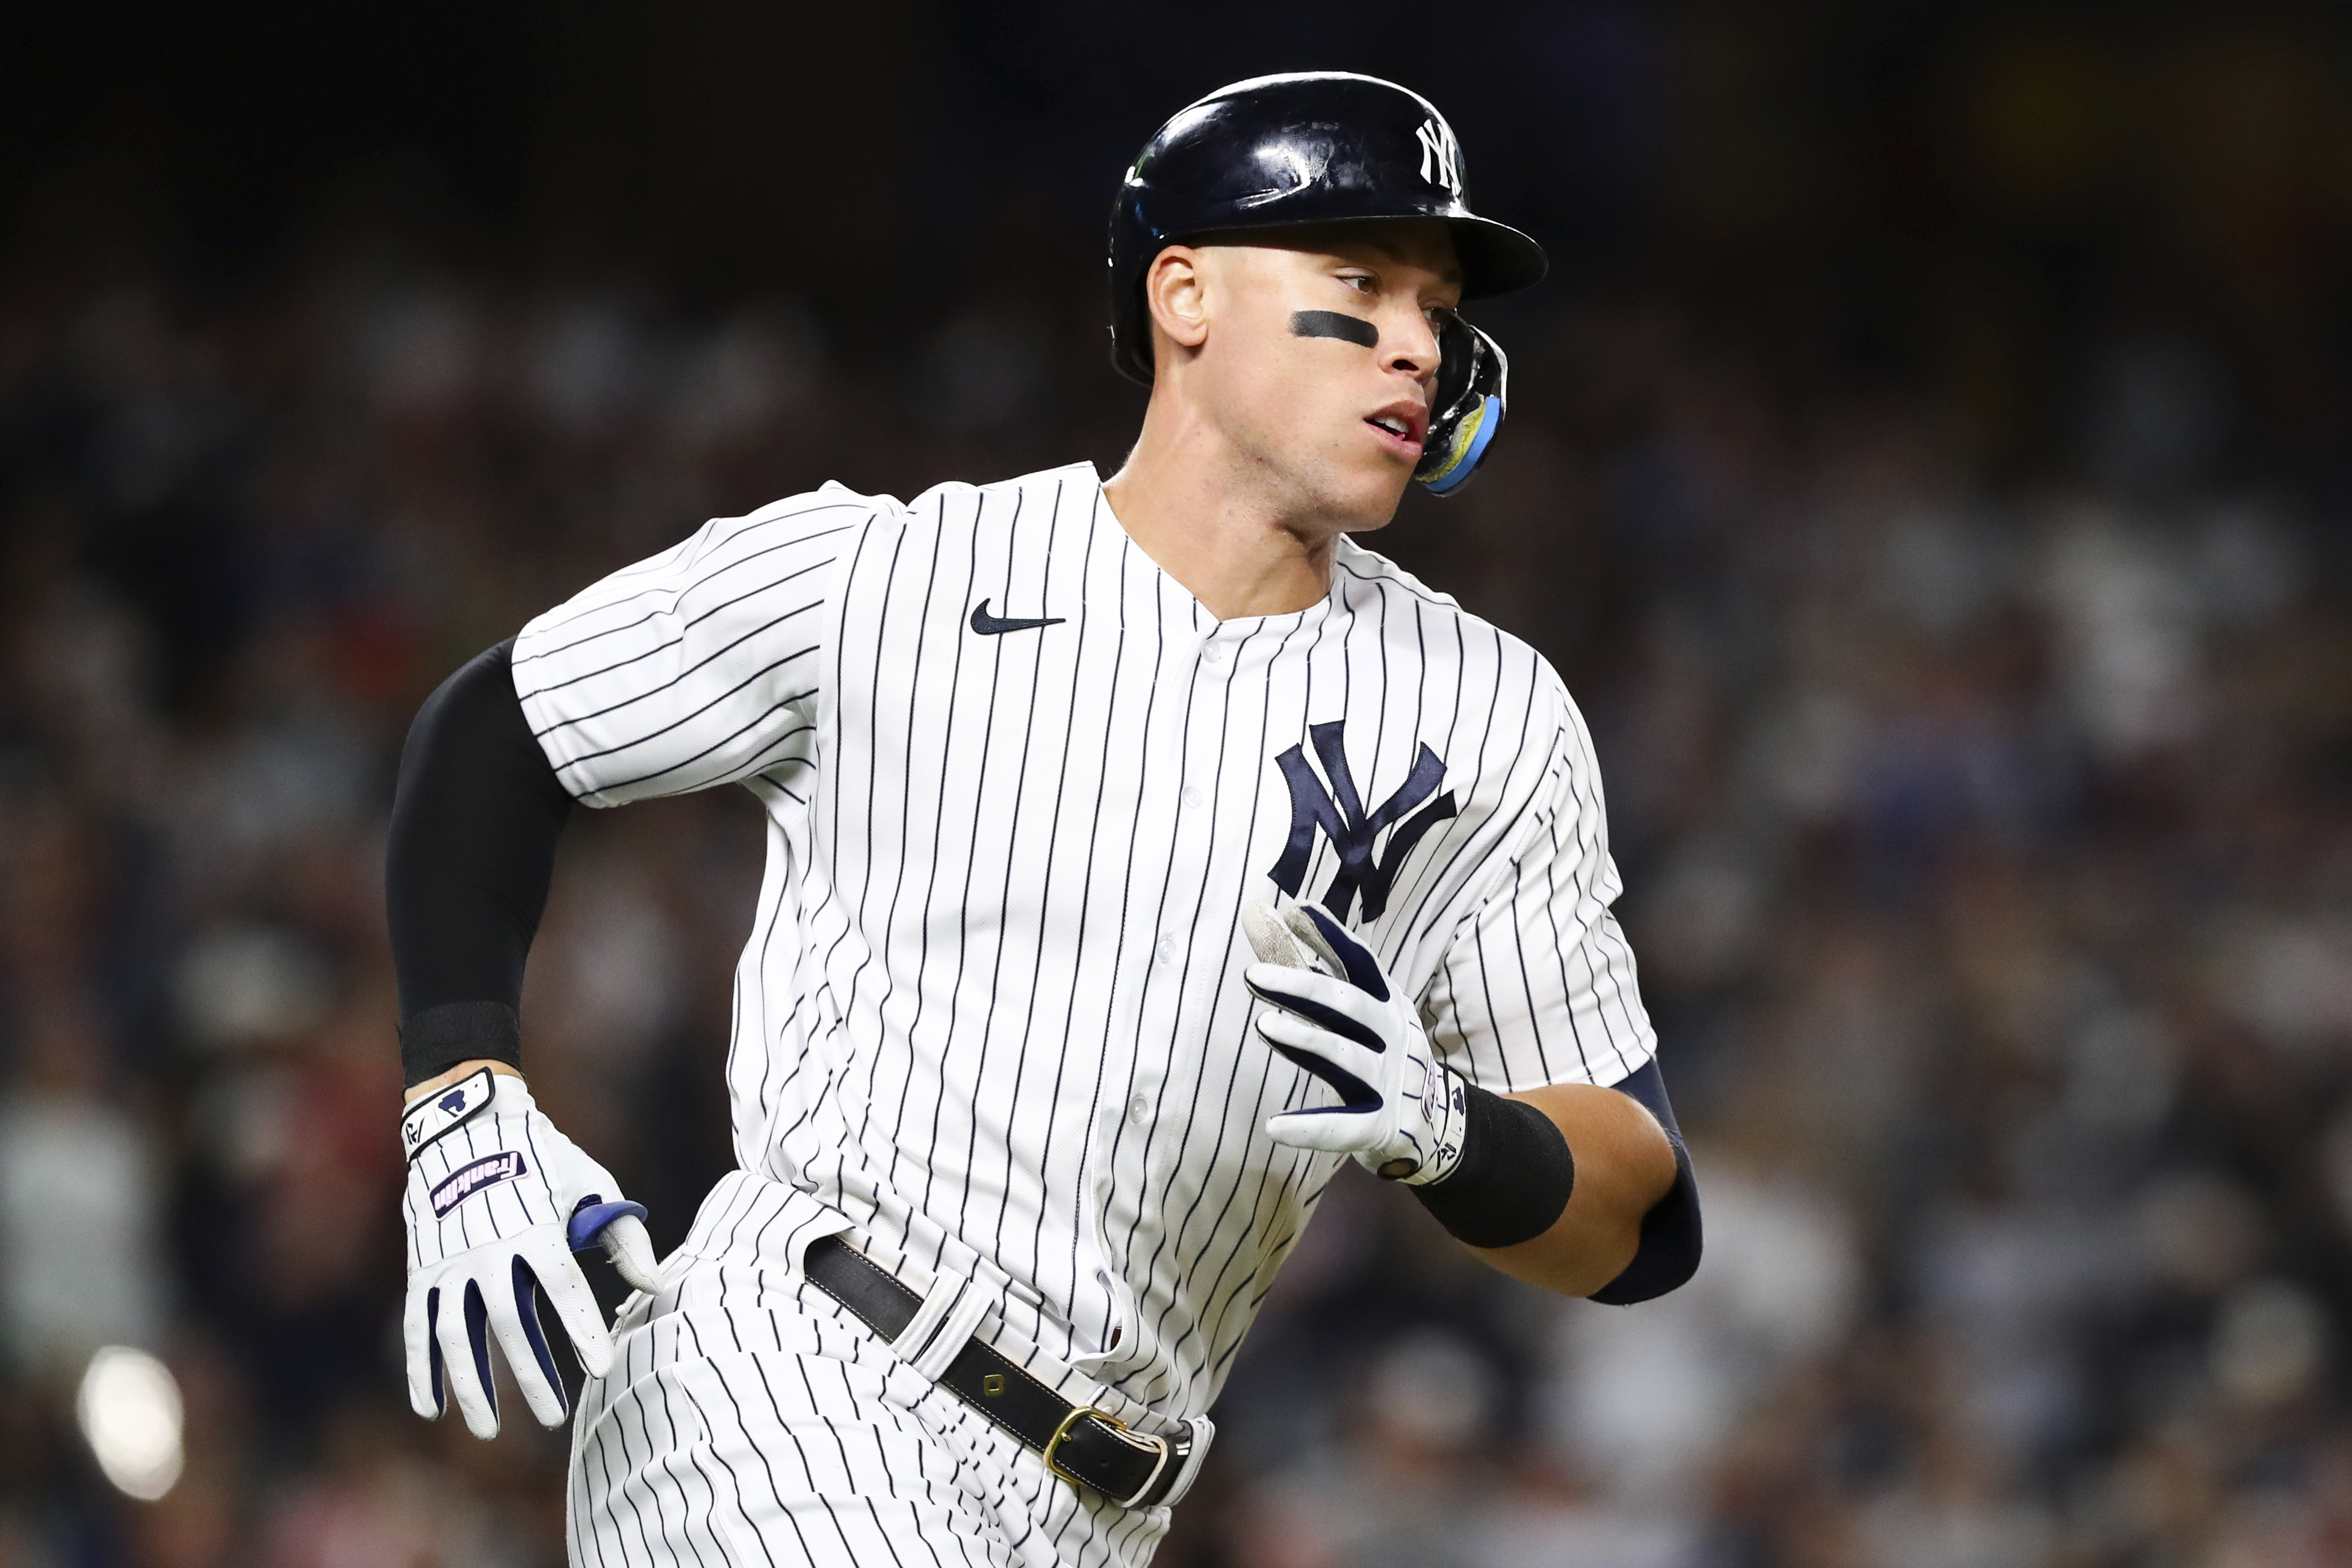 Aaron Judge hits AL record 62nd home run, breaking tie with Roger